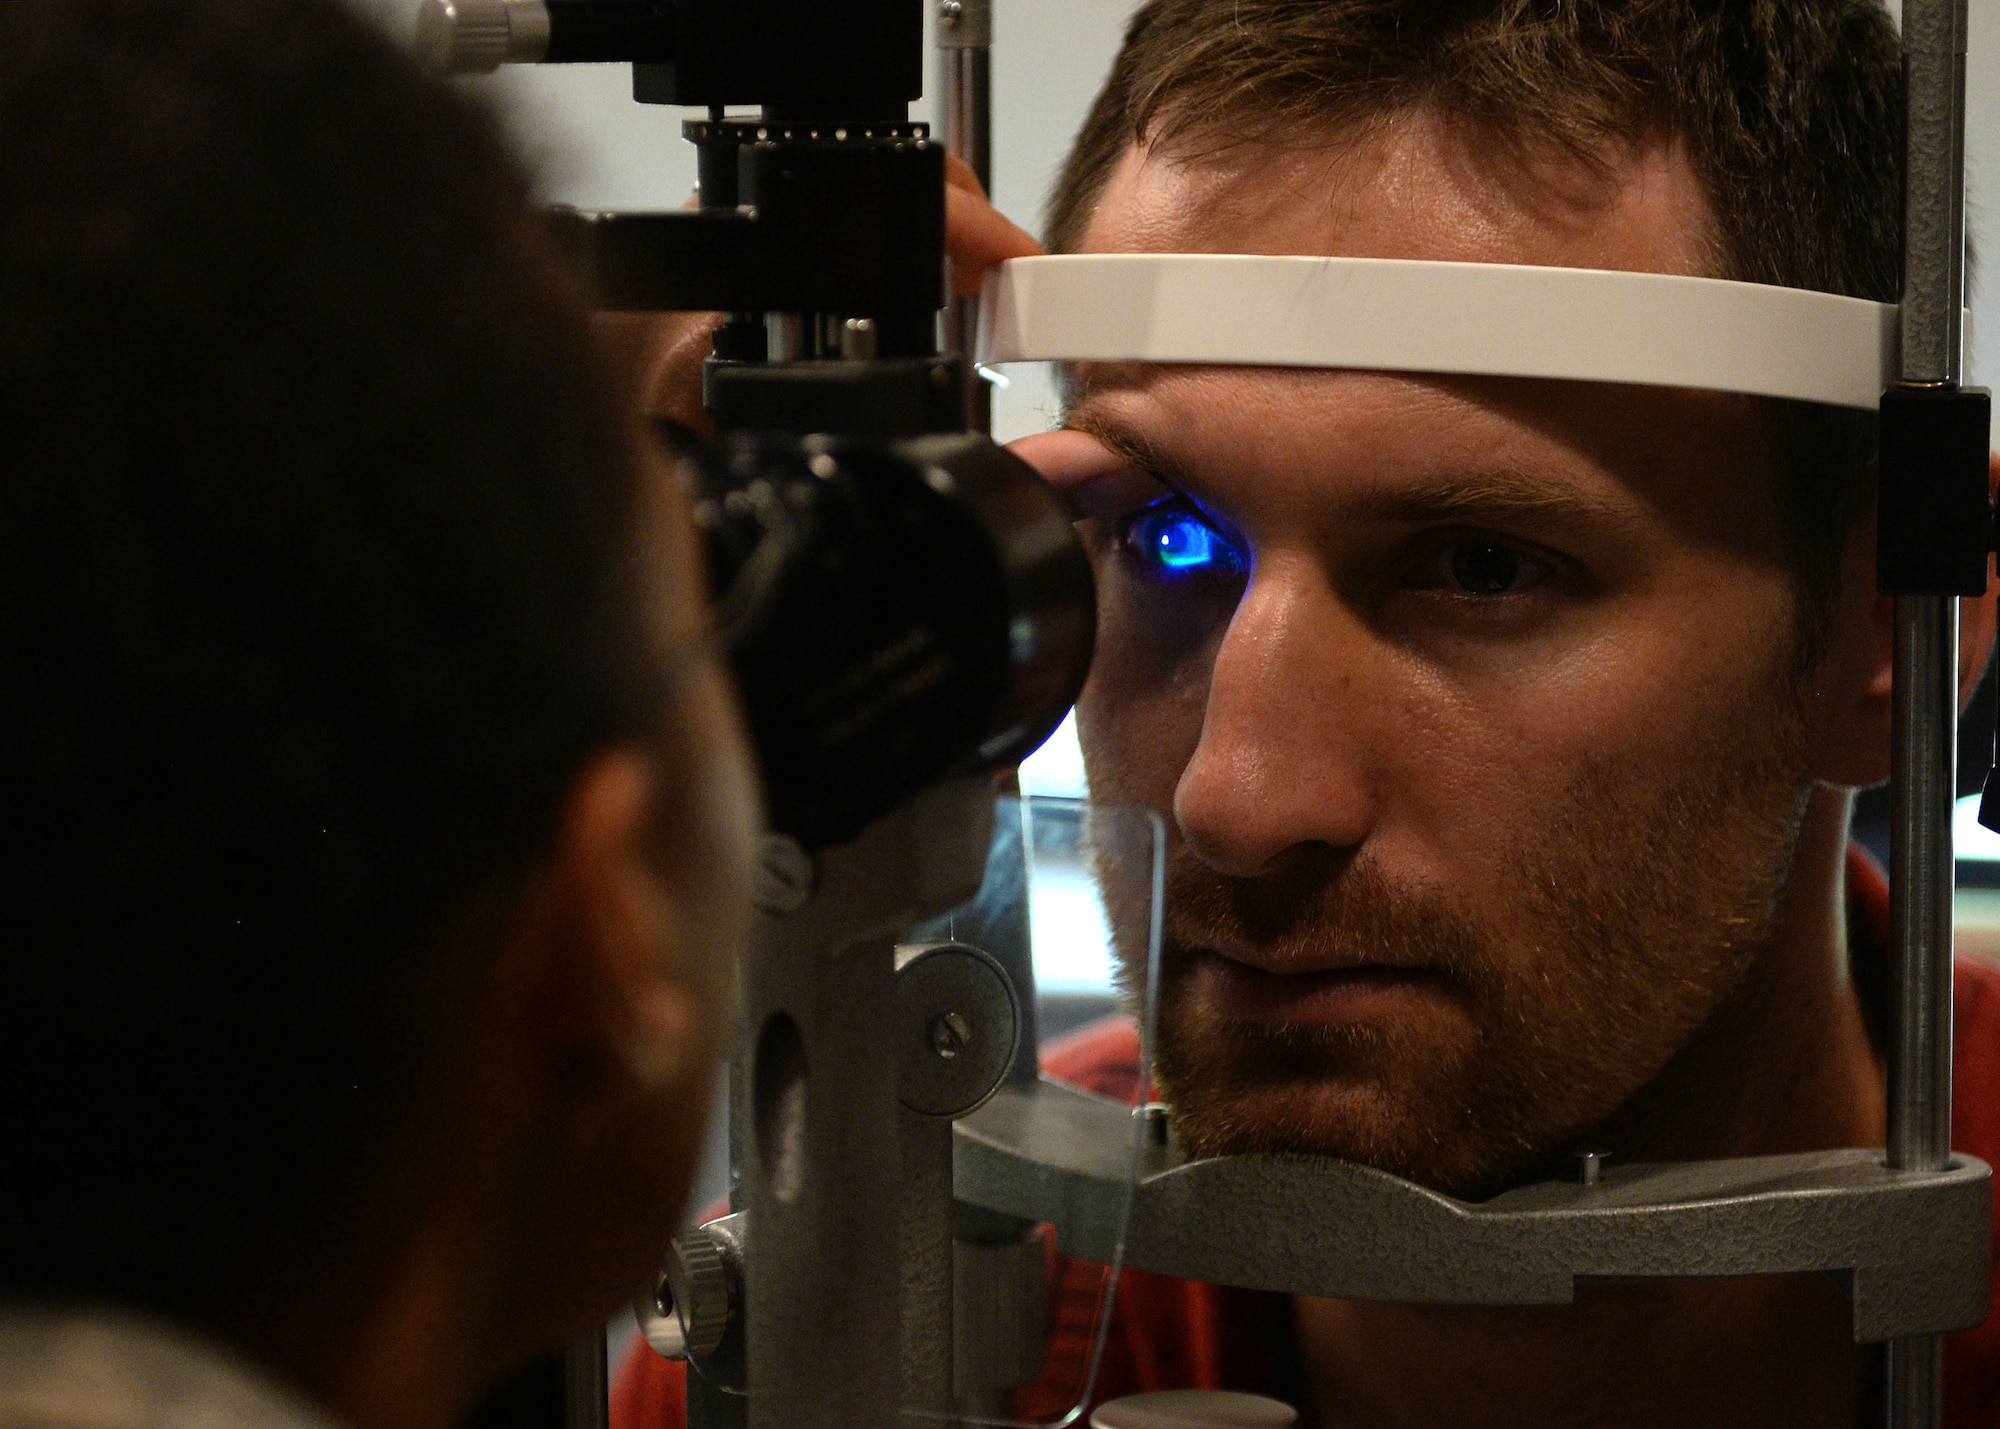 Capt. Brennan Schilperoort, 41st Airlift Squadron pilot, has his eye inspected by Maj. Felicia Rinken, 19th Medical Group optometrist, July 24, 2017 at the 19th Medical Group optometry clinic on Little Rock Air Force Base, Arkansas. The optometry clinic ensures Airmen at Little Rock Air Force base are visually fit to fight by providing annual eye exams, pre-operation and post operation eye care, and diagnosing and treating eye infections. (U.S. Air Force photo by Airman 1st Class Codie Collins)